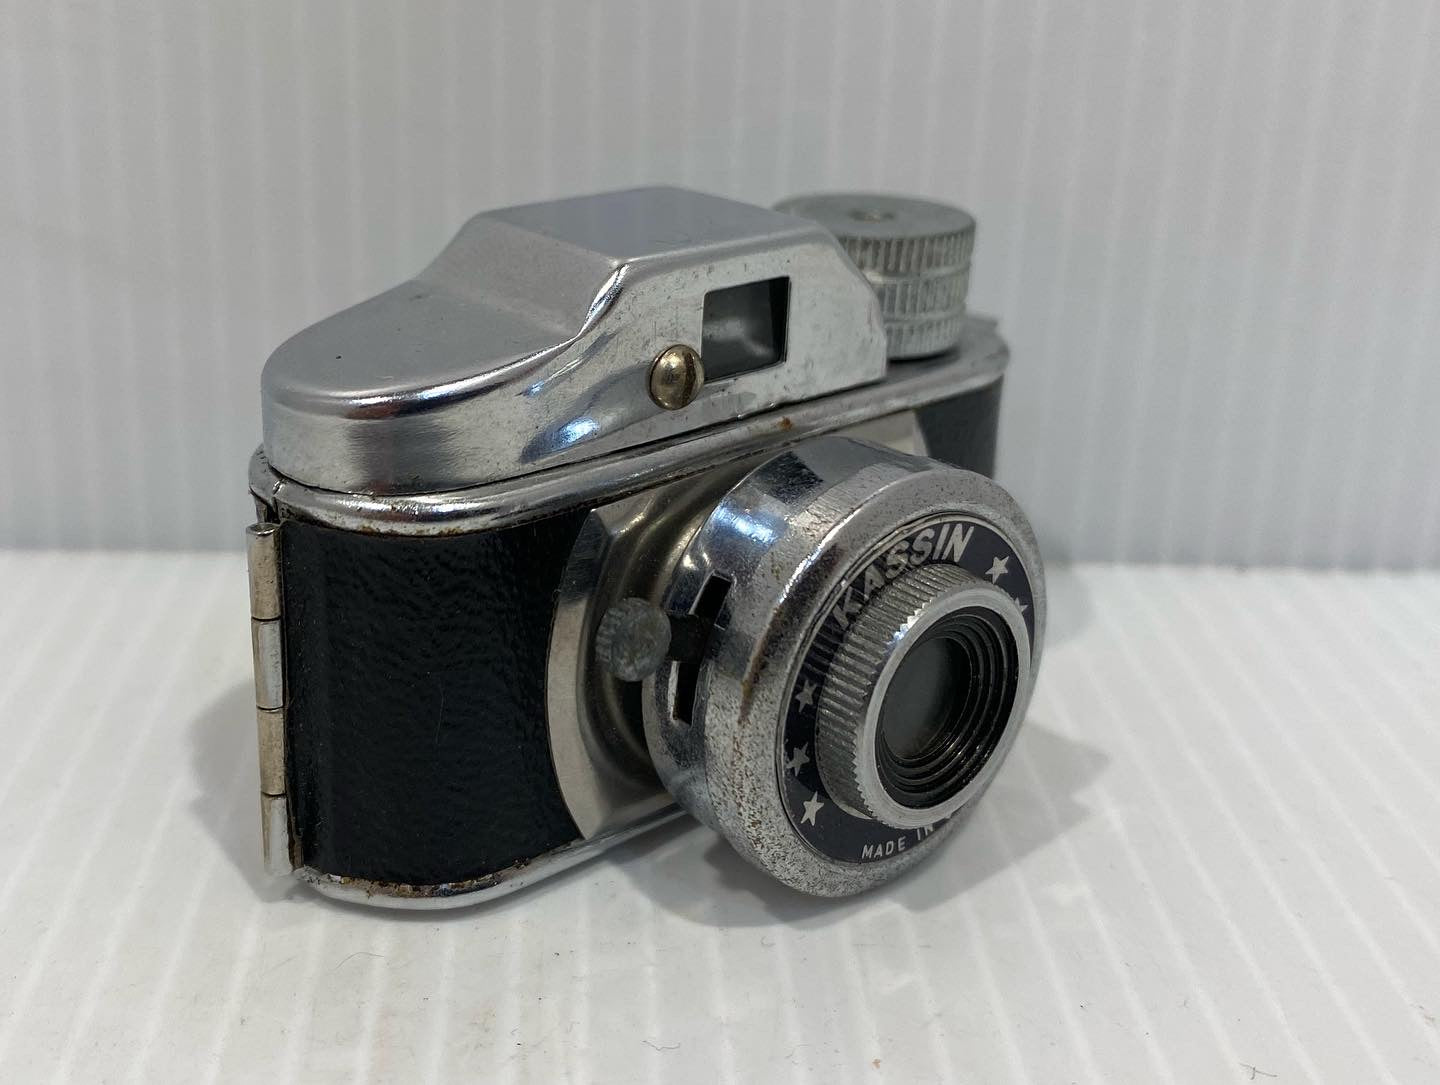 Vintage 1950's Miniature Kassin mini Camera with original leather case. Made in Japan!